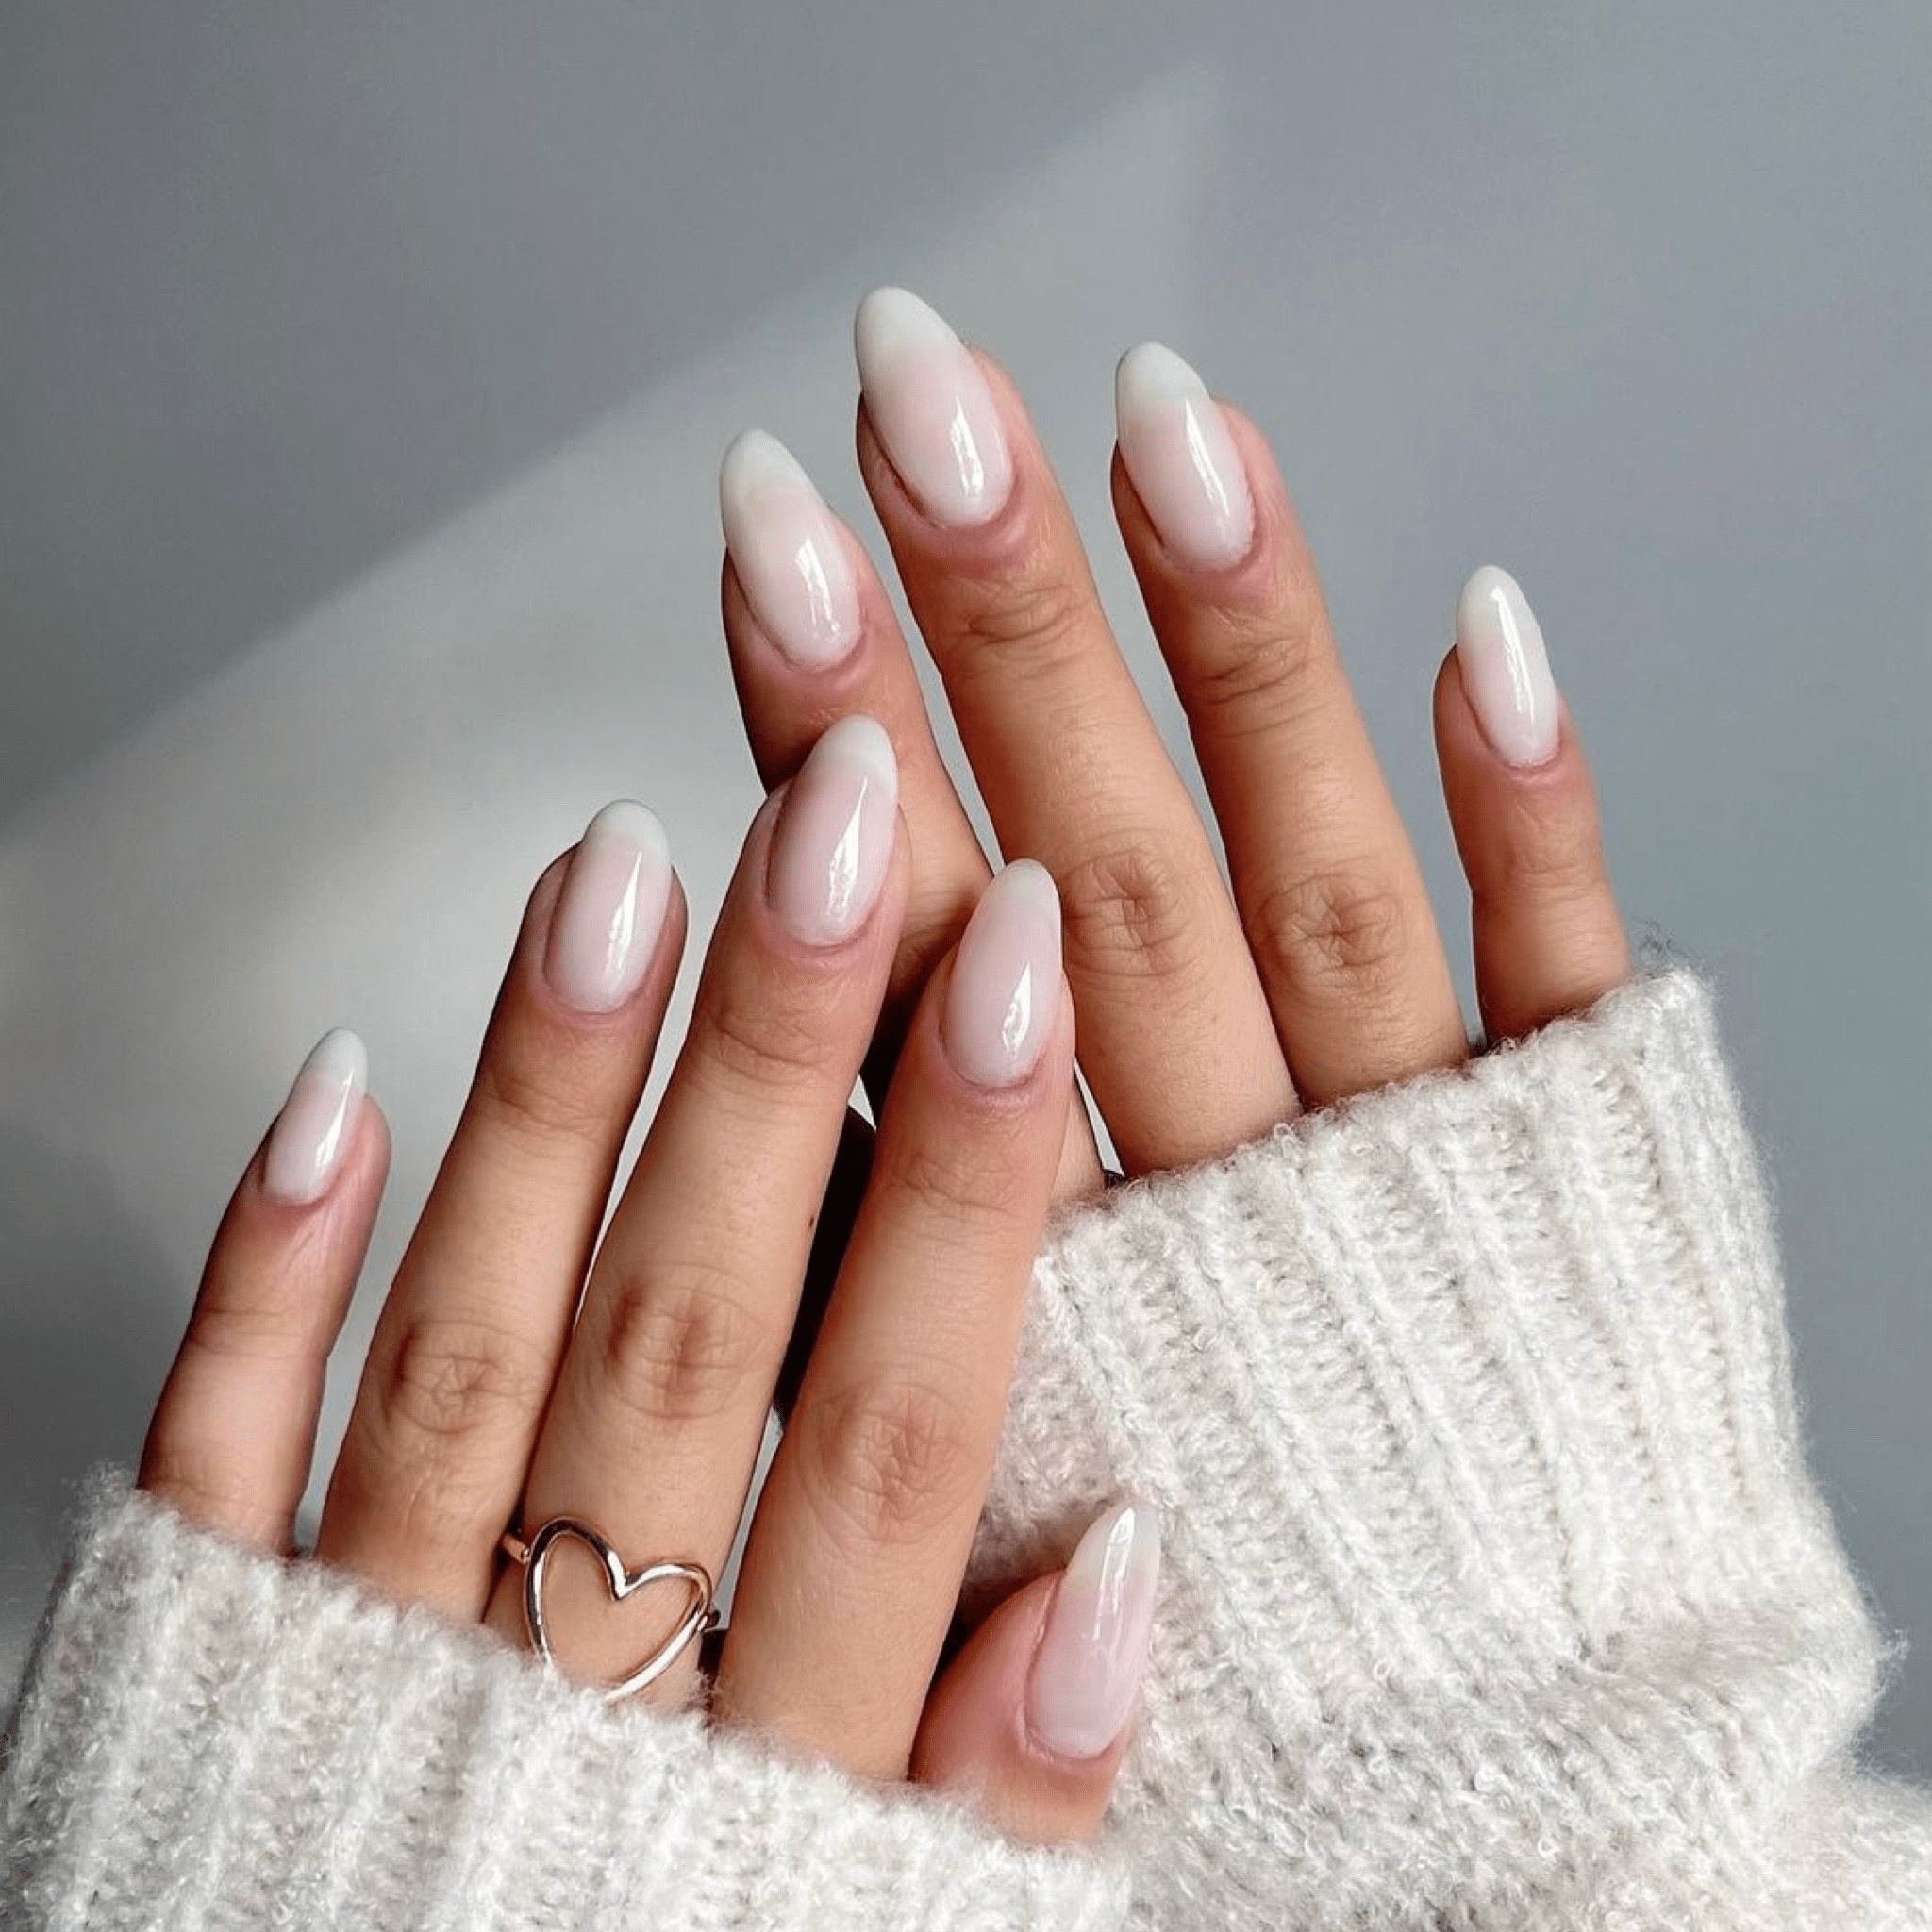 Milky Nails: The manicure that will sweep this summer